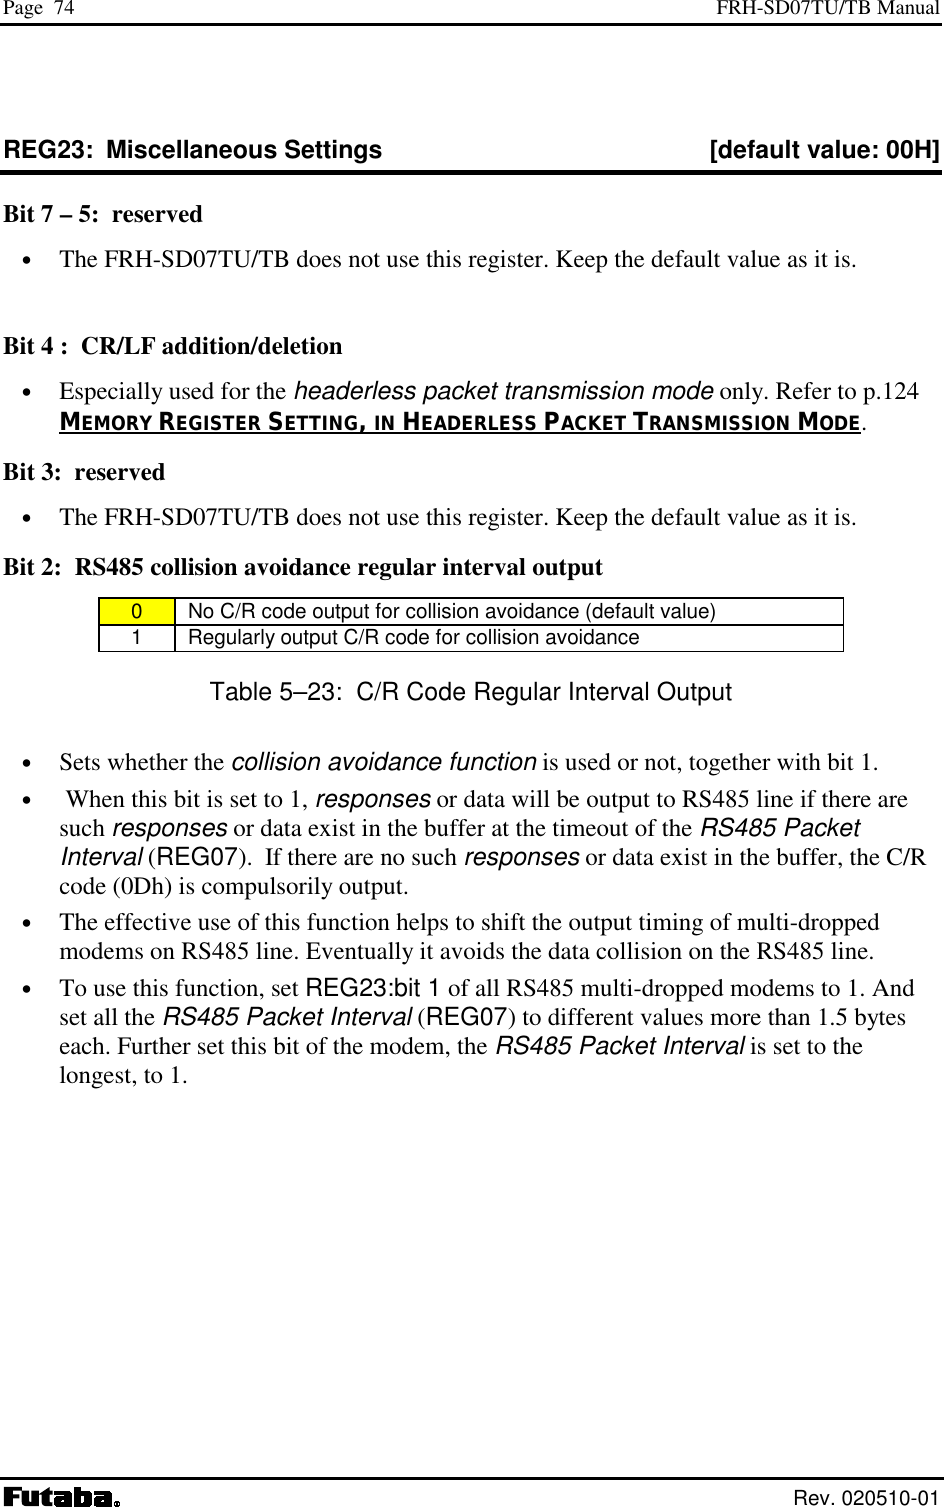 Page  74  FRH-SD07TU/TB Manual  Rev. 020510-01 REG23:  Miscellaneous Settings  [default value: 00H] Bit 7 – 5:  reserved •  The FRH-SD07TU/TB does not use this register. Keep the default value as it is.  Bit 4 :  CR/LF addition/deletion •  Especially used for the headerless packet transmission mode only. Refer to p.124 MEMORY REGISTER SETTING, IN HEADERLESS PACKET TRANSMISSION MODE. Bit 3:  reserved •  The FRH-SD07TU/TB does not use this register. Keep the default value as it is. Bit 2:  RS485 collision avoidance regular interval output 0   No C/R code output for collision avoidance (default value) 1   Regularly output C/R code for collision avoidance Table 5–23:  C/R Code Regular Interval Output •  Sets whether the collision avoidance function is used or not, together with bit 1. •   When this bit is set to 1, responses or data will be output to RS485 line if there are such responses or data exist in the buffer at the timeout of the RS485 Packet Interval (REG07).  If there are no such responses or data exist in the buffer, the C/R code (0Dh) is compulsorily output. •  The effective use of this function helps to shift the output timing of multi-dropped  modems on RS485 line. Eventually it avoids the data collision on the RS485 line.  •  To use this function, set REG23:bit 1 of all RS485 multi-dropped modems to 1. And set all the RS485 Packet Interval (REG07) to different values more than 1.5 bytes each. Further set this bit of the modem, the RS485 Packet Interval is set to the longest, to 1. 